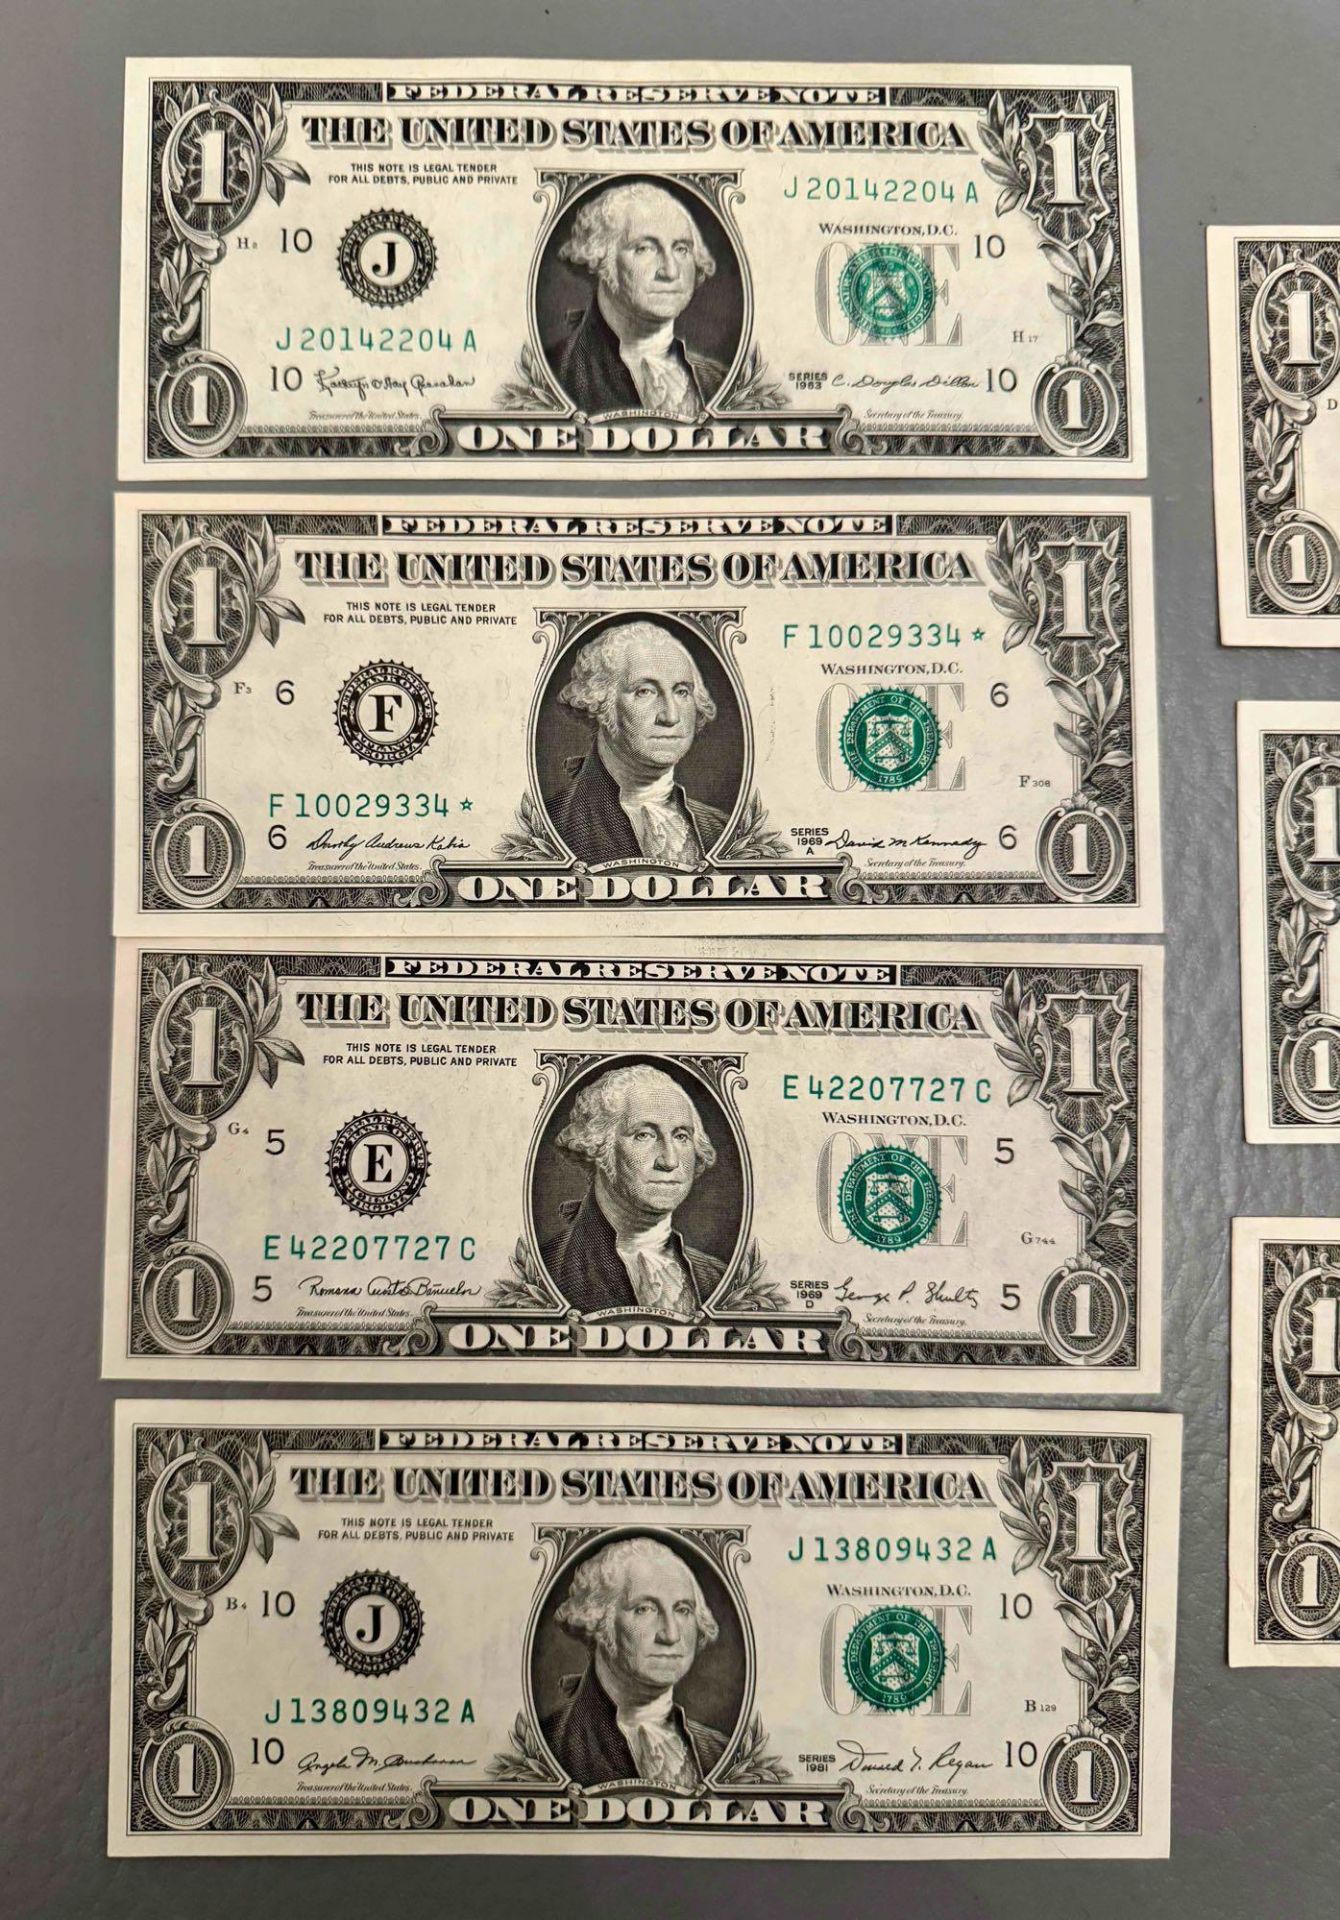 Currency uncirculated notes: 1999 $10 Star Note, 1976 First Day issue w/stamp $2 note, 1963 $1 Note, - Image 4 of 6